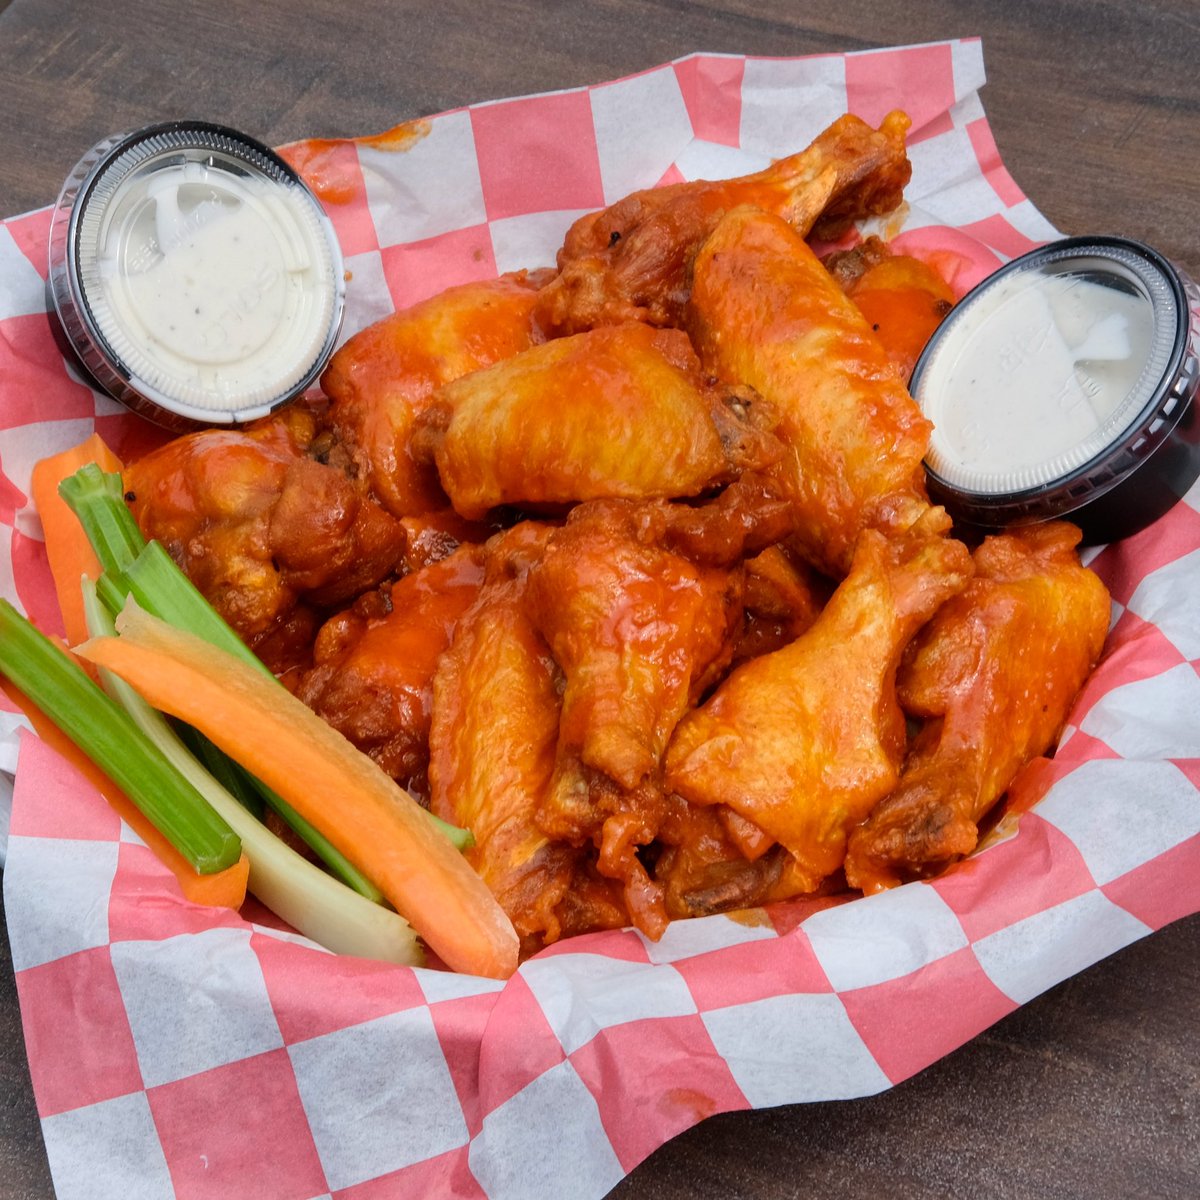 It’s Wednesday. Get the wings. 🔥

Open today at 11am. Pickup & Delivery available. Call for pickup: (773) 661-1573. View menu & delivery at beckschicago.com

#chicagobars #lincolnpark #lincolnparkchicago #chicagoeats #chicagofood #chicagosbest #eeeeeats